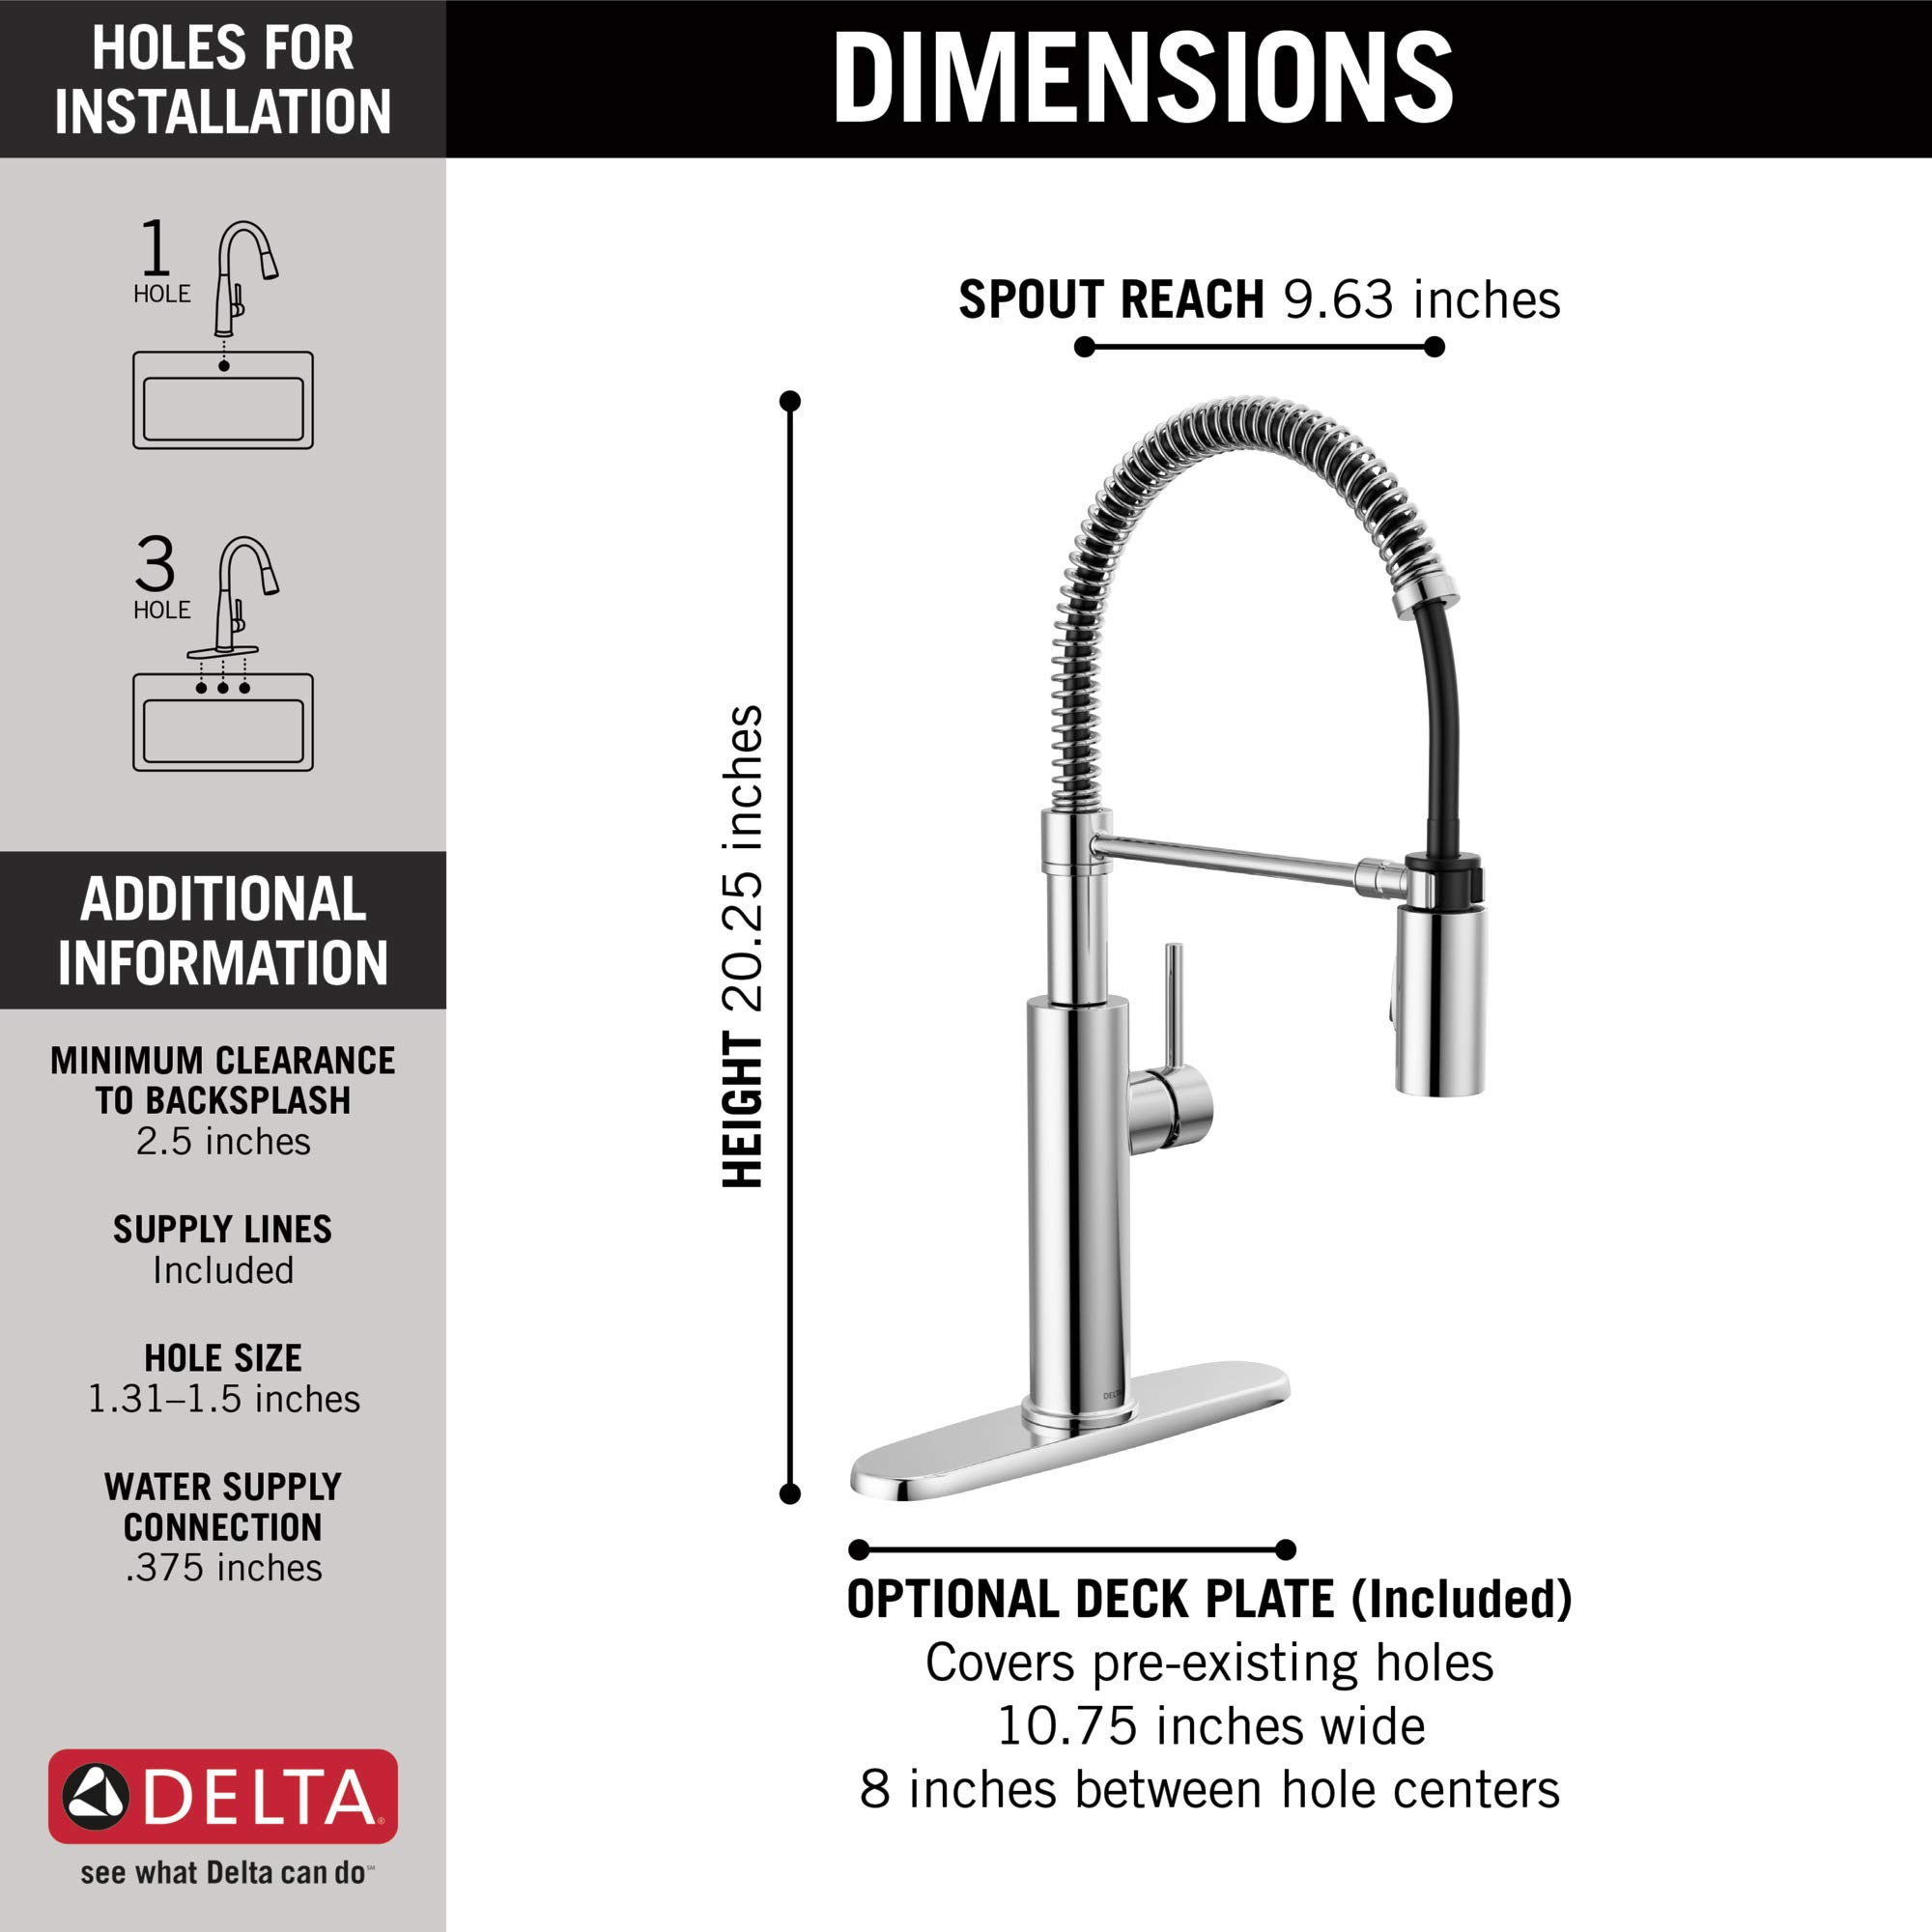 Delta Faucet Antoni Chrome Kitchen Faucet with Pull Down Sprayer, Commercial Style Kitchen Sink Faucet, Faucets for Kitchen Sinks, Single-Handle, Magnetic Docking Spray Head, Chrome 18803-DST